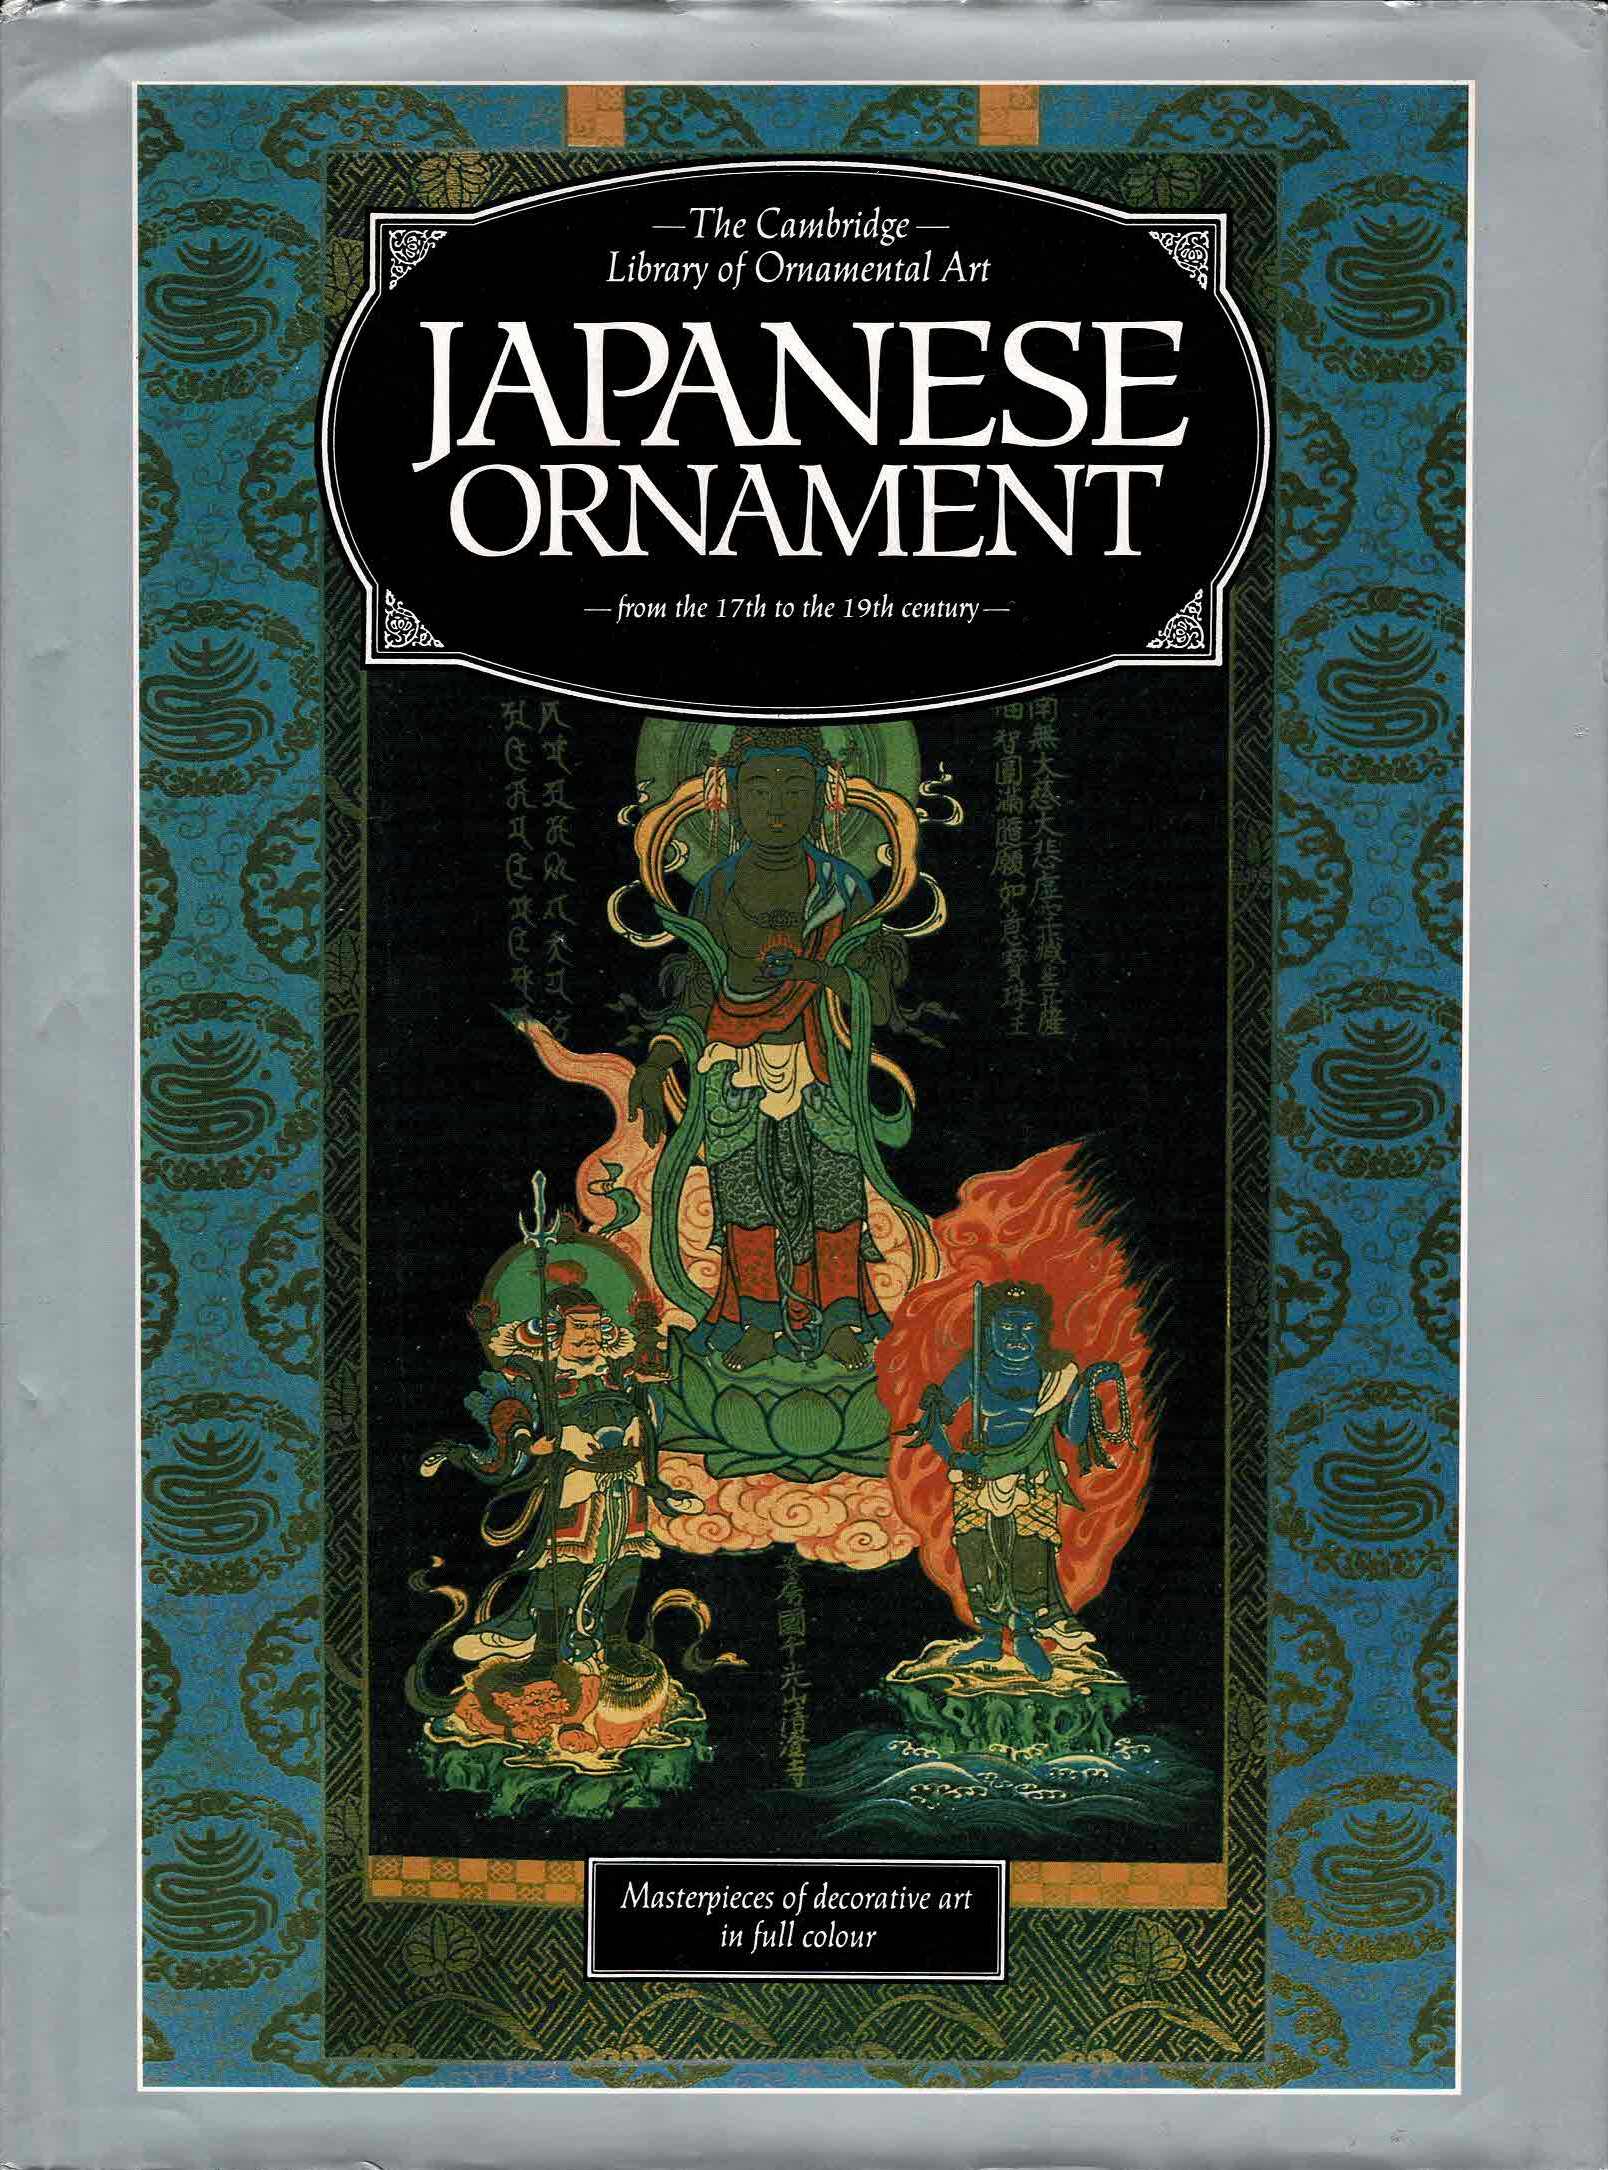 The Cambridge Library of Ornamental Art - Japanese Ornament from the 17th to the 19th Century